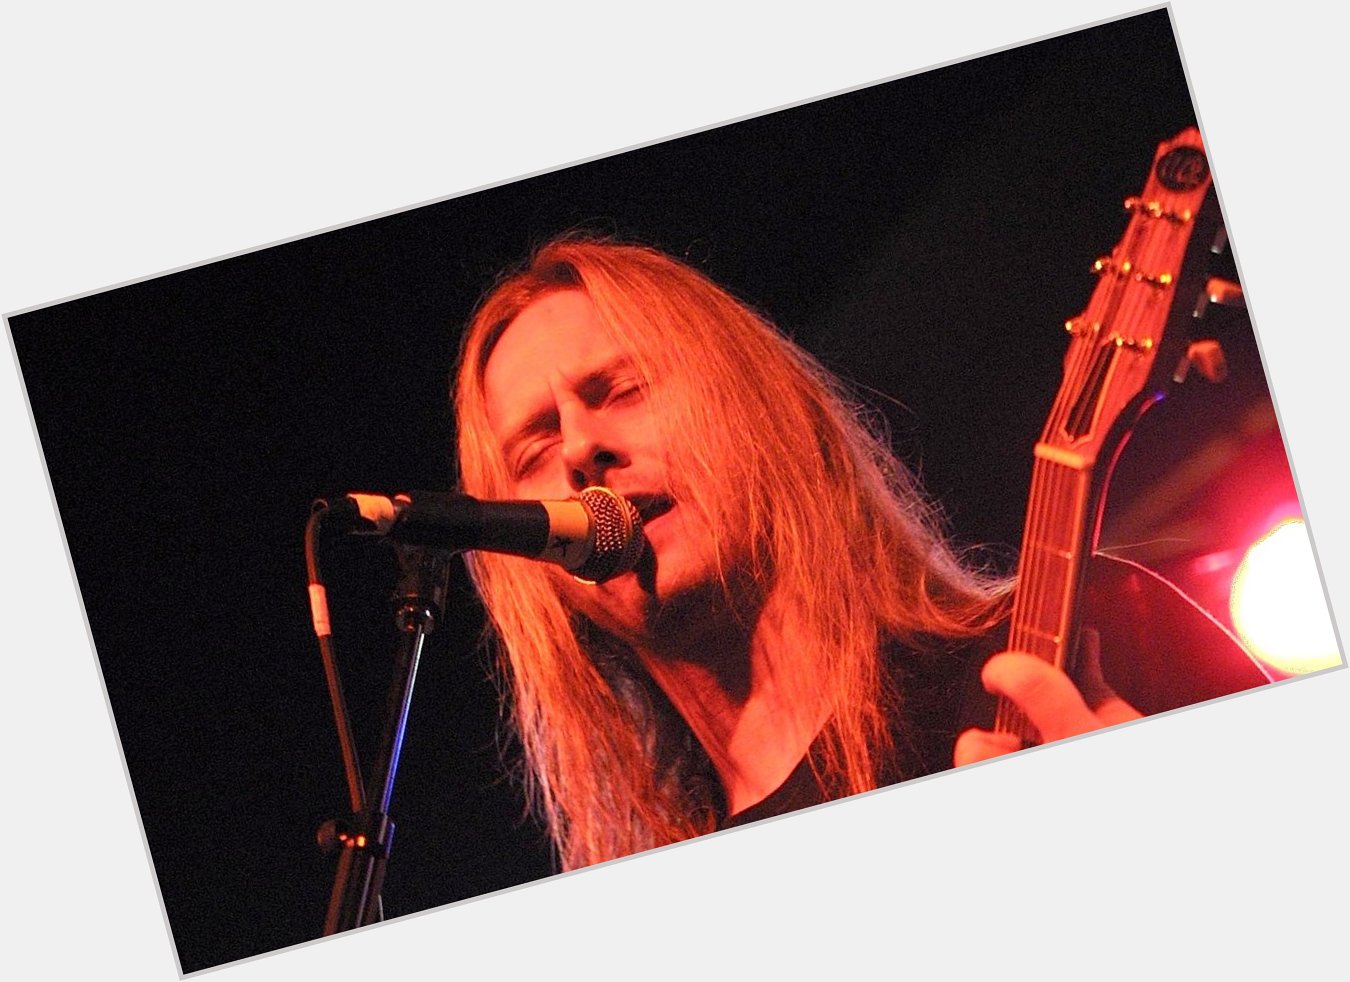 Happy birthday, Jerry Cantrell! What\s your favorite Alice in Chains song? 